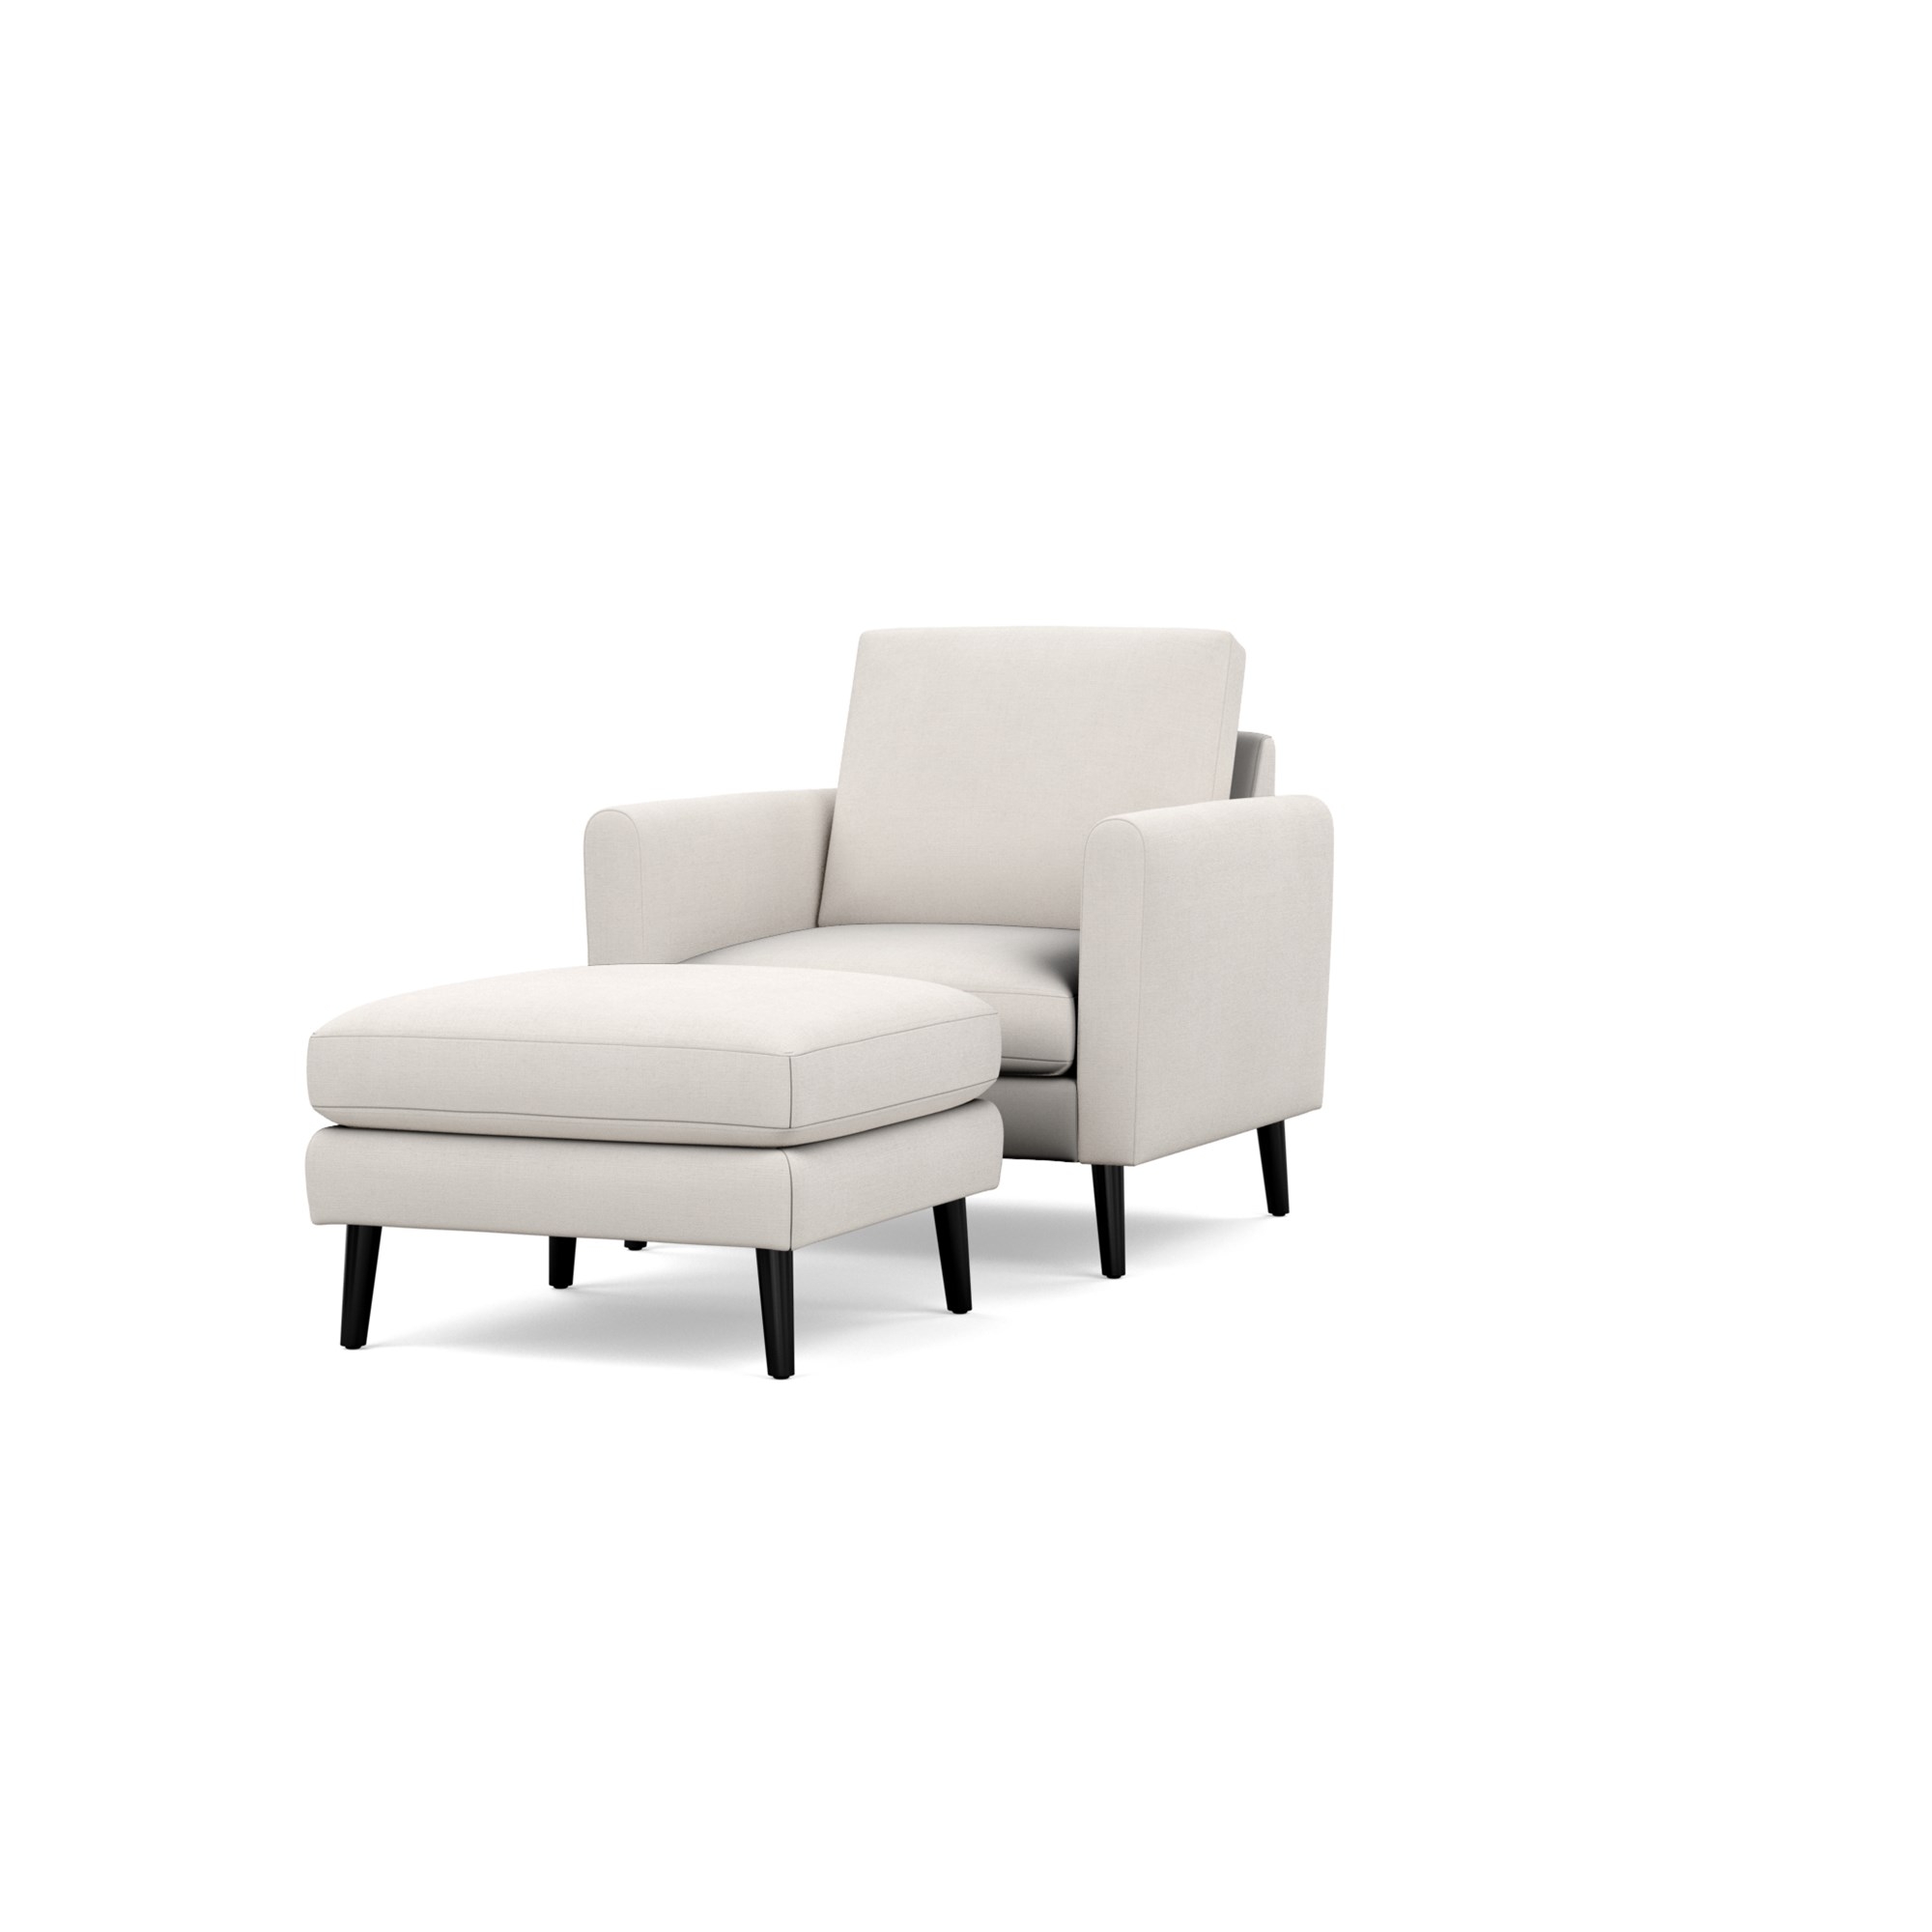 Nomad Armchair and Ottoman High Arms in Ivory, Leg Finish: EbonyLegs - Image 0